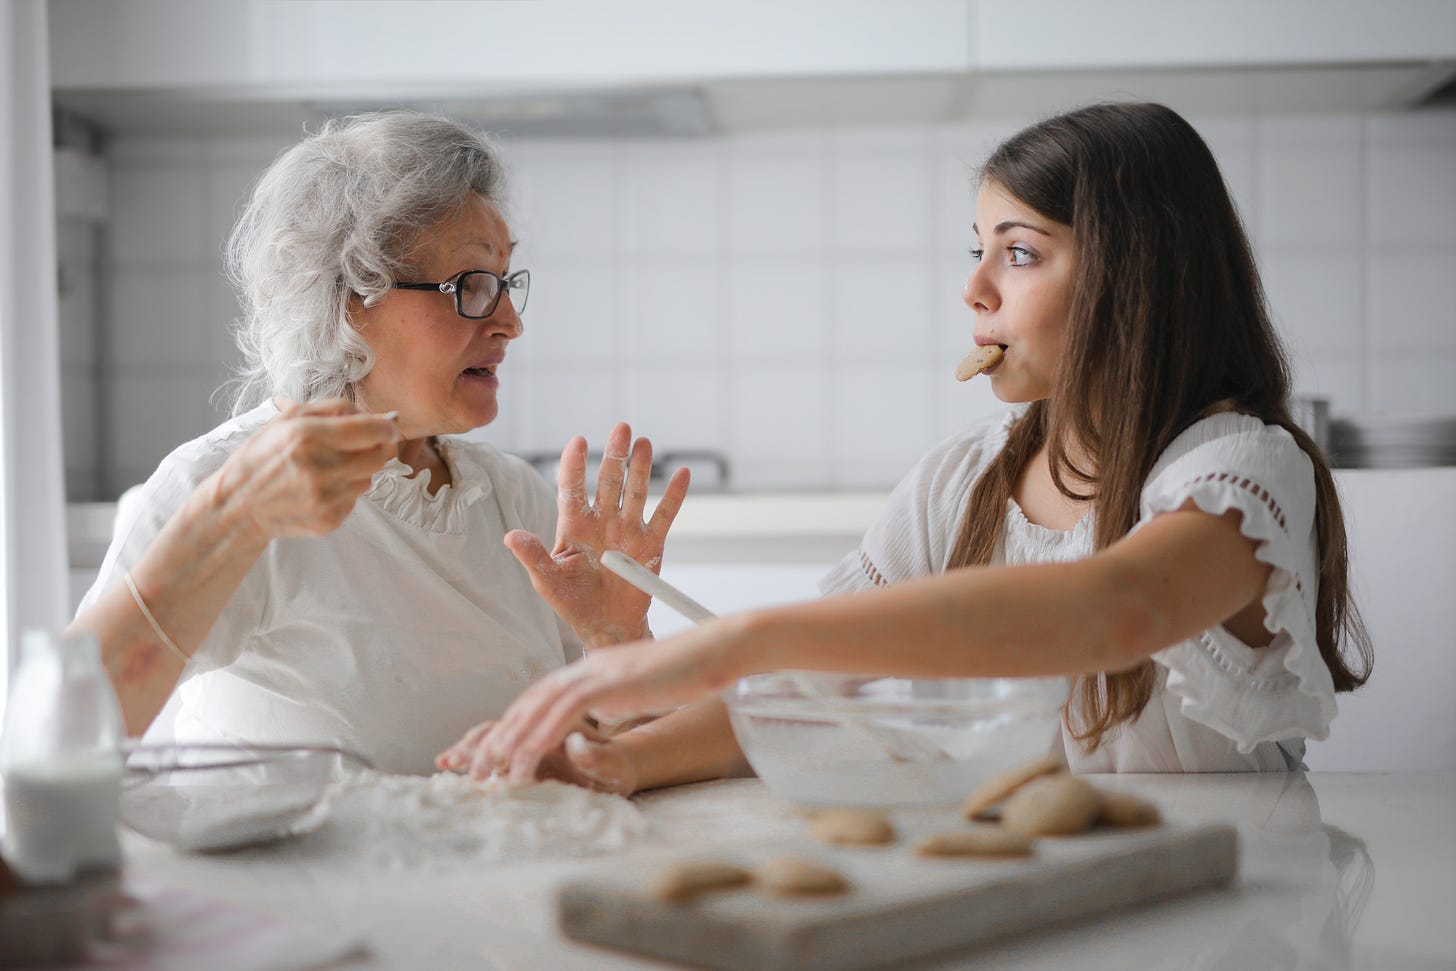 A grandma talking to a young girl while they bake cookies